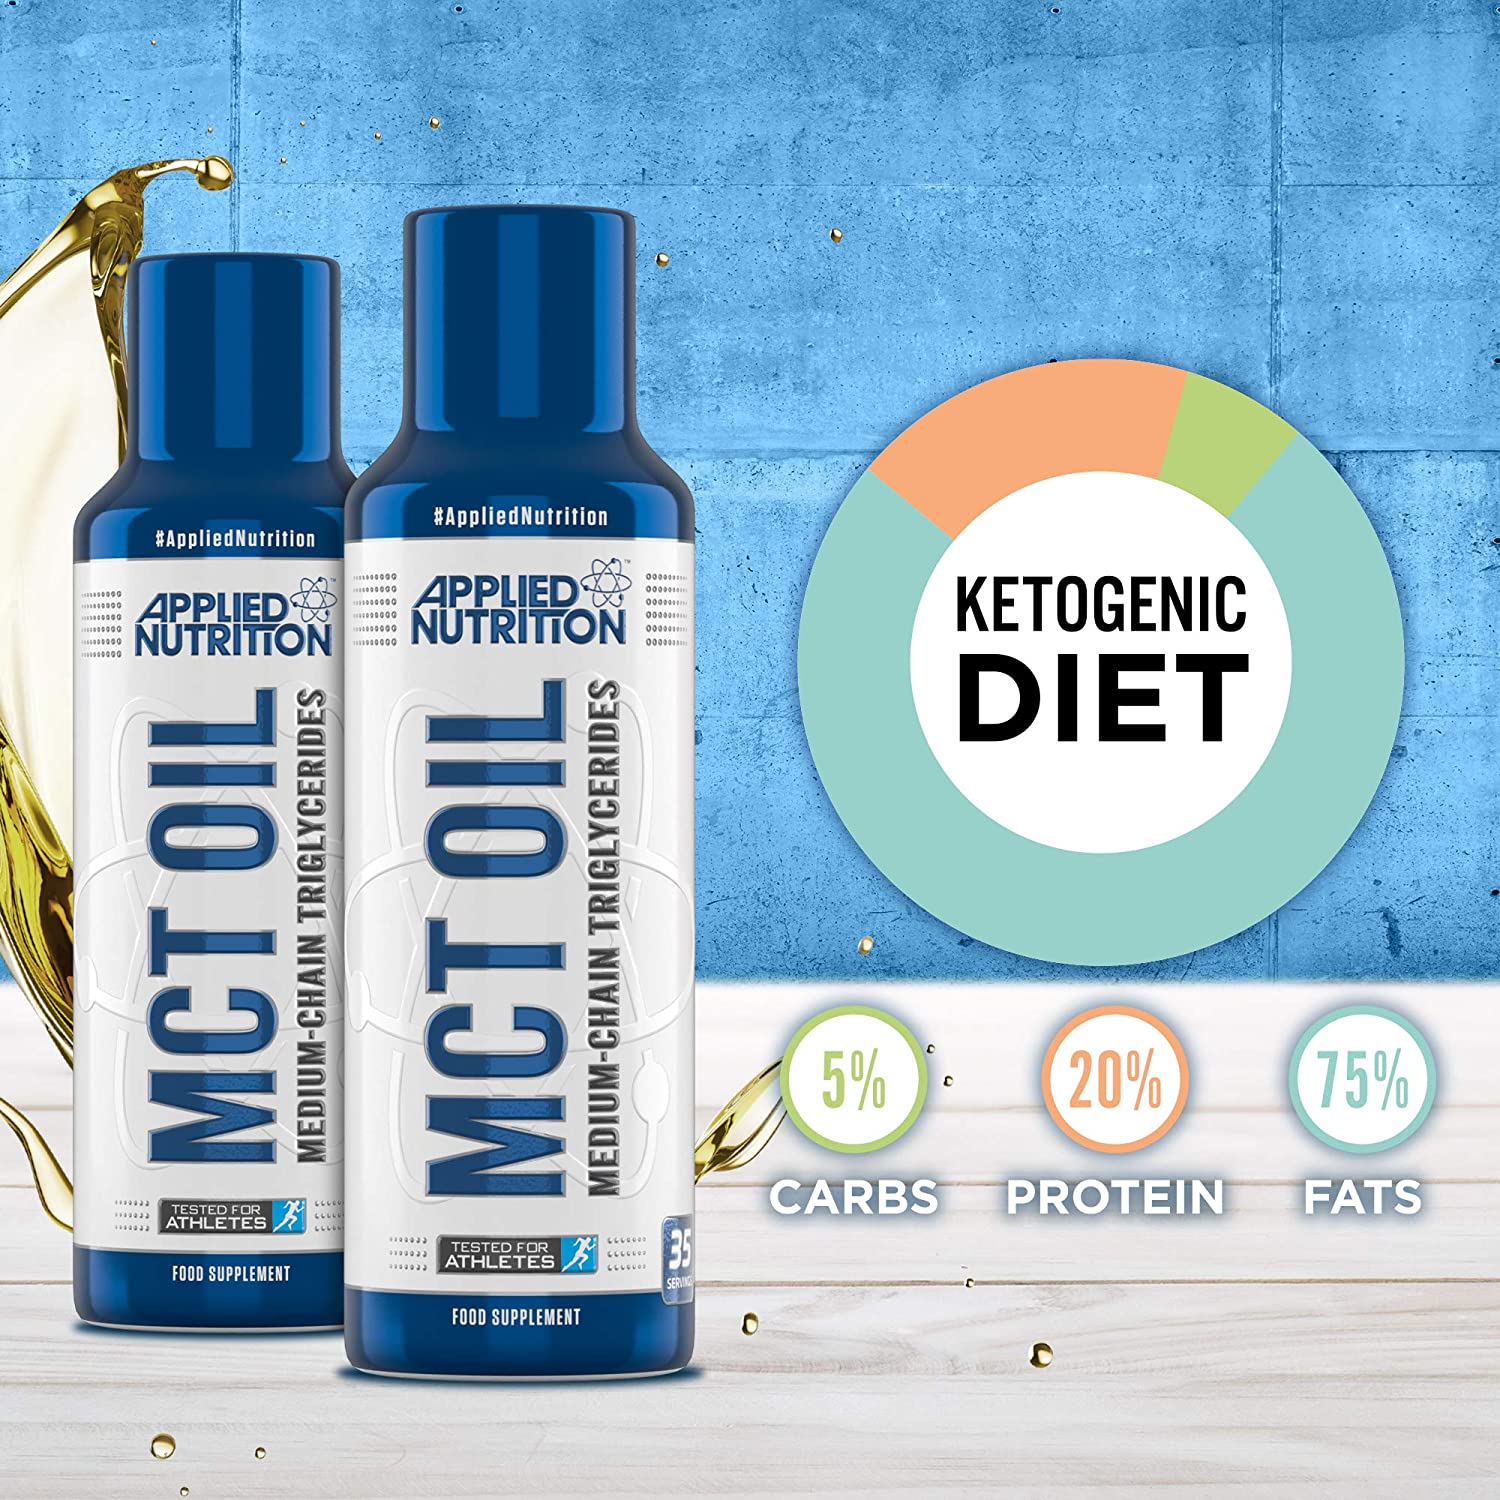 Applied Nutrition MCT Oil for Paleo, Keto & Low Carb Diets